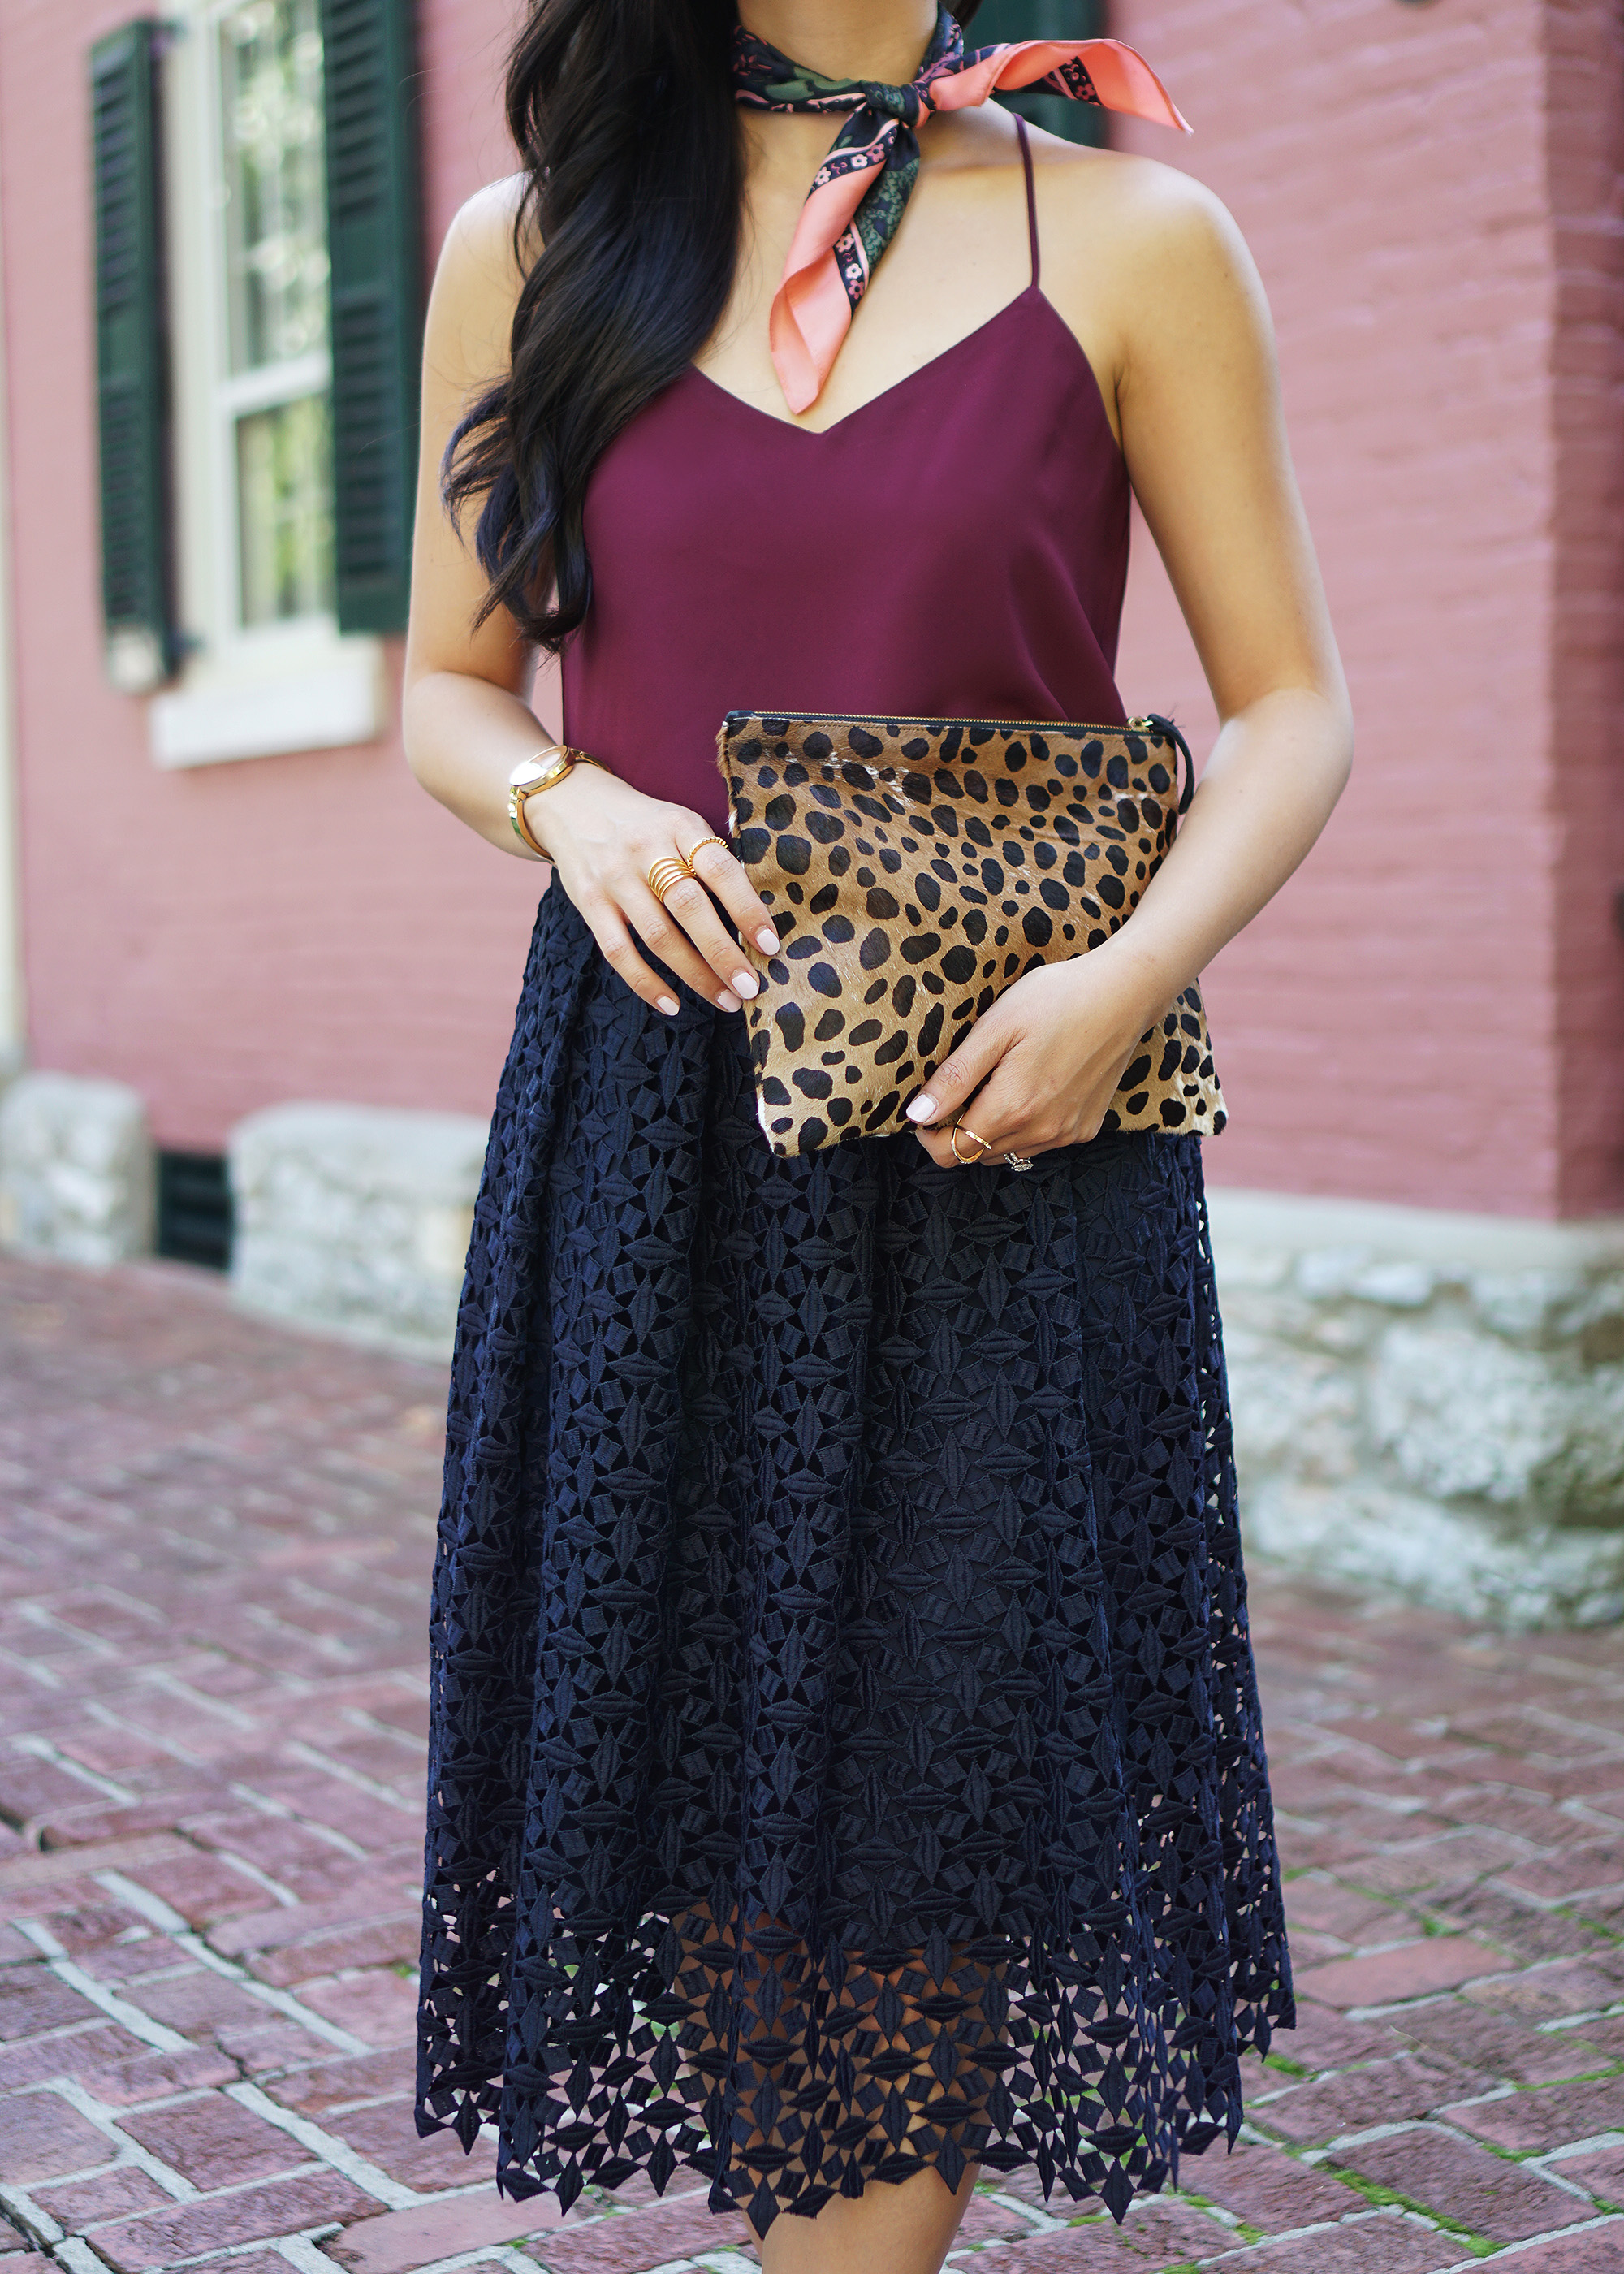 Fall Style in Warm Weather: Burgundy, Navy and Leopard